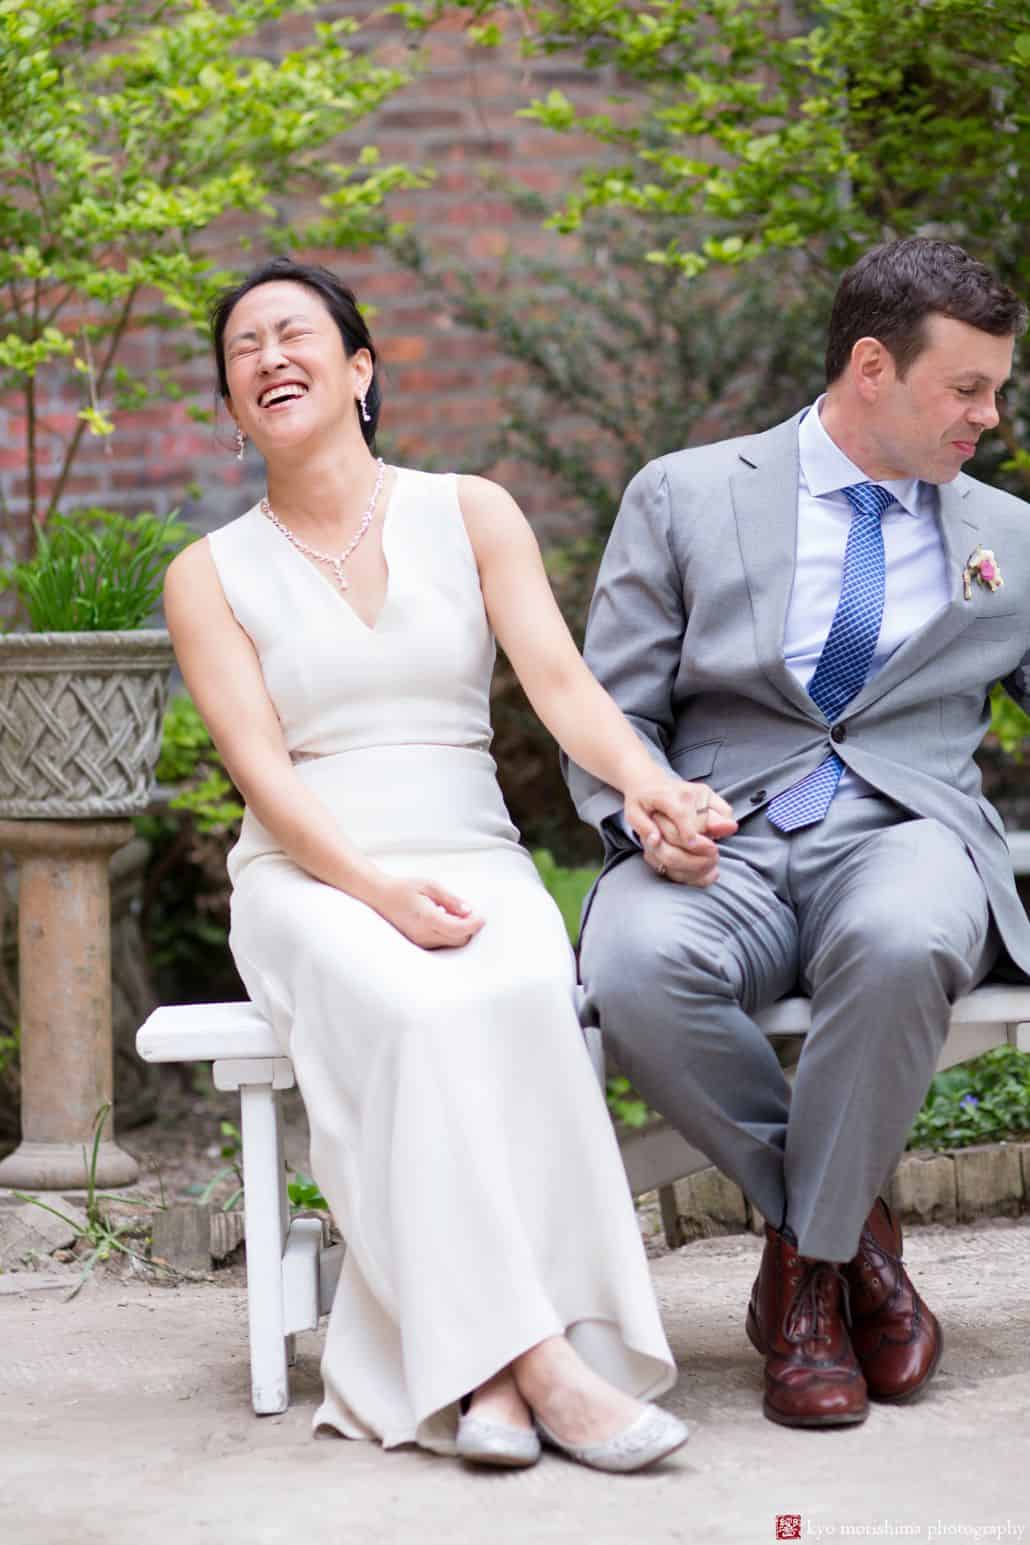 Light-hearted portrait session of a couple sitting on an outdoor bench, the bride is laughing and closing her eyes while holding the goom's hand and the groom is smiling looking at something on his left side, photographed by wedding photographer in central NJ Kyo Morishima.